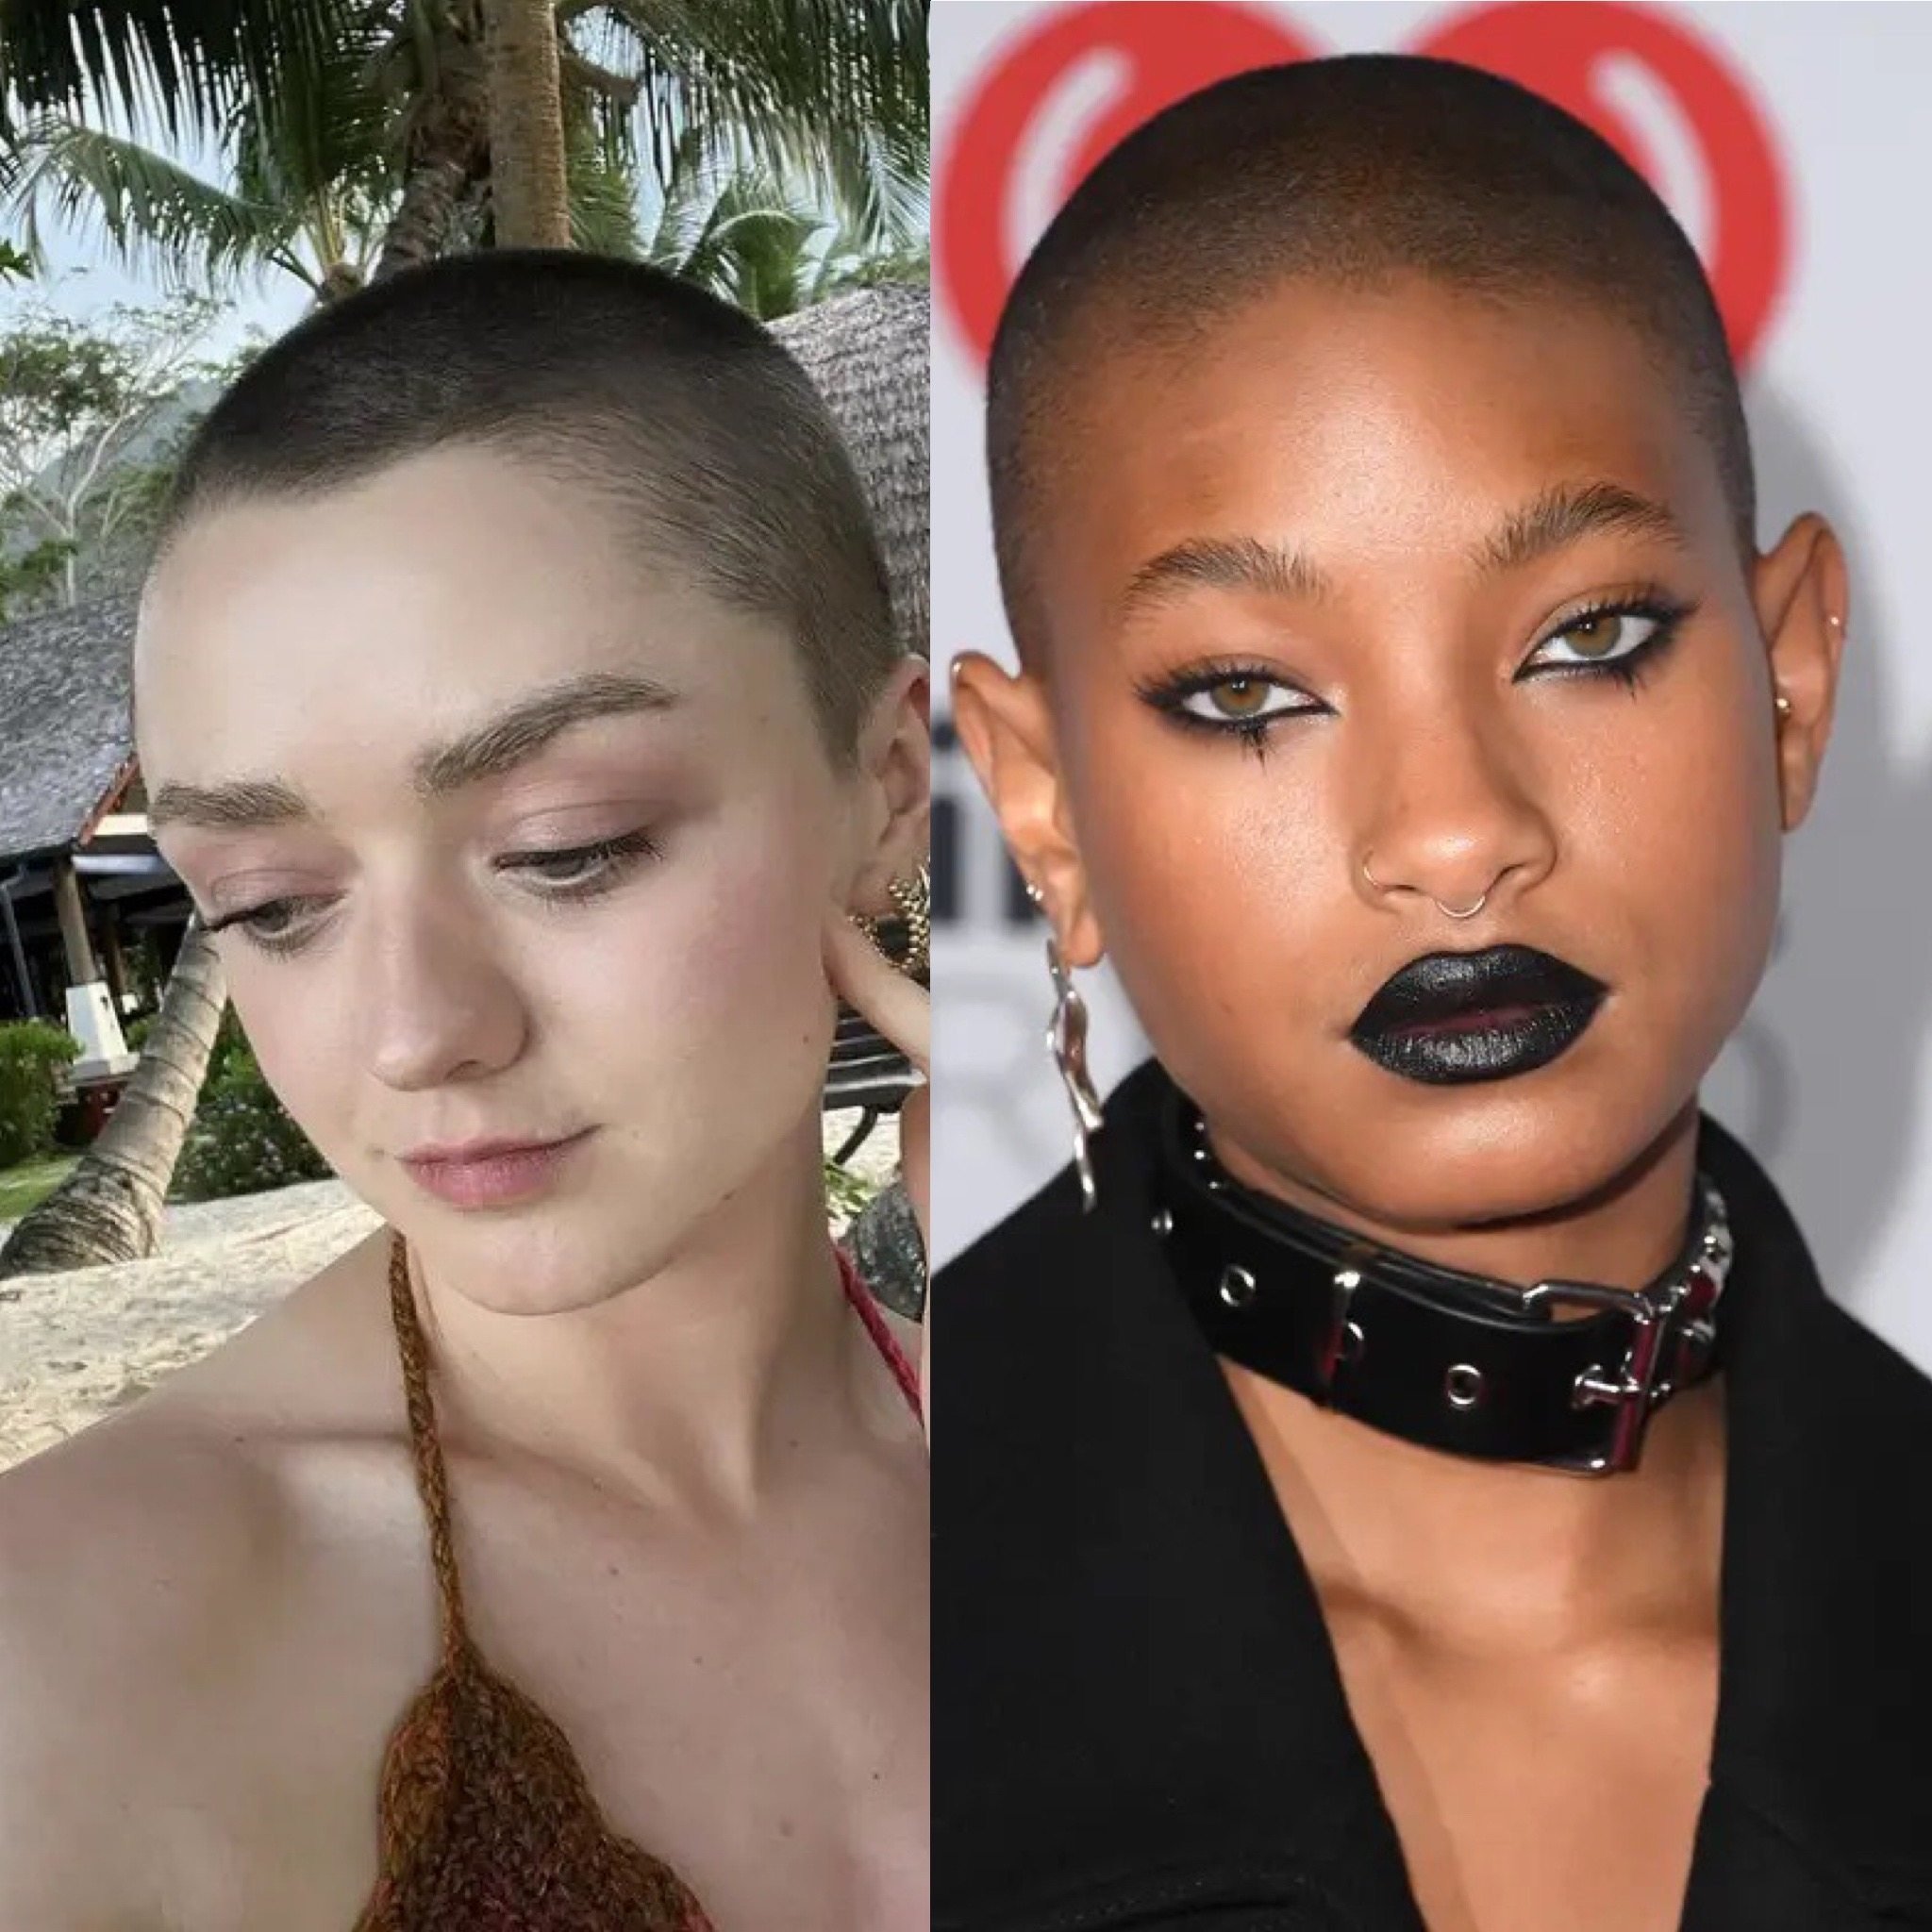 Maisie Williams (above, left) and Willow Smith are among women who have been spotted with buzz cuts recently. We look at why it is the latest beauty trend for celebrities. Photo: Instagram